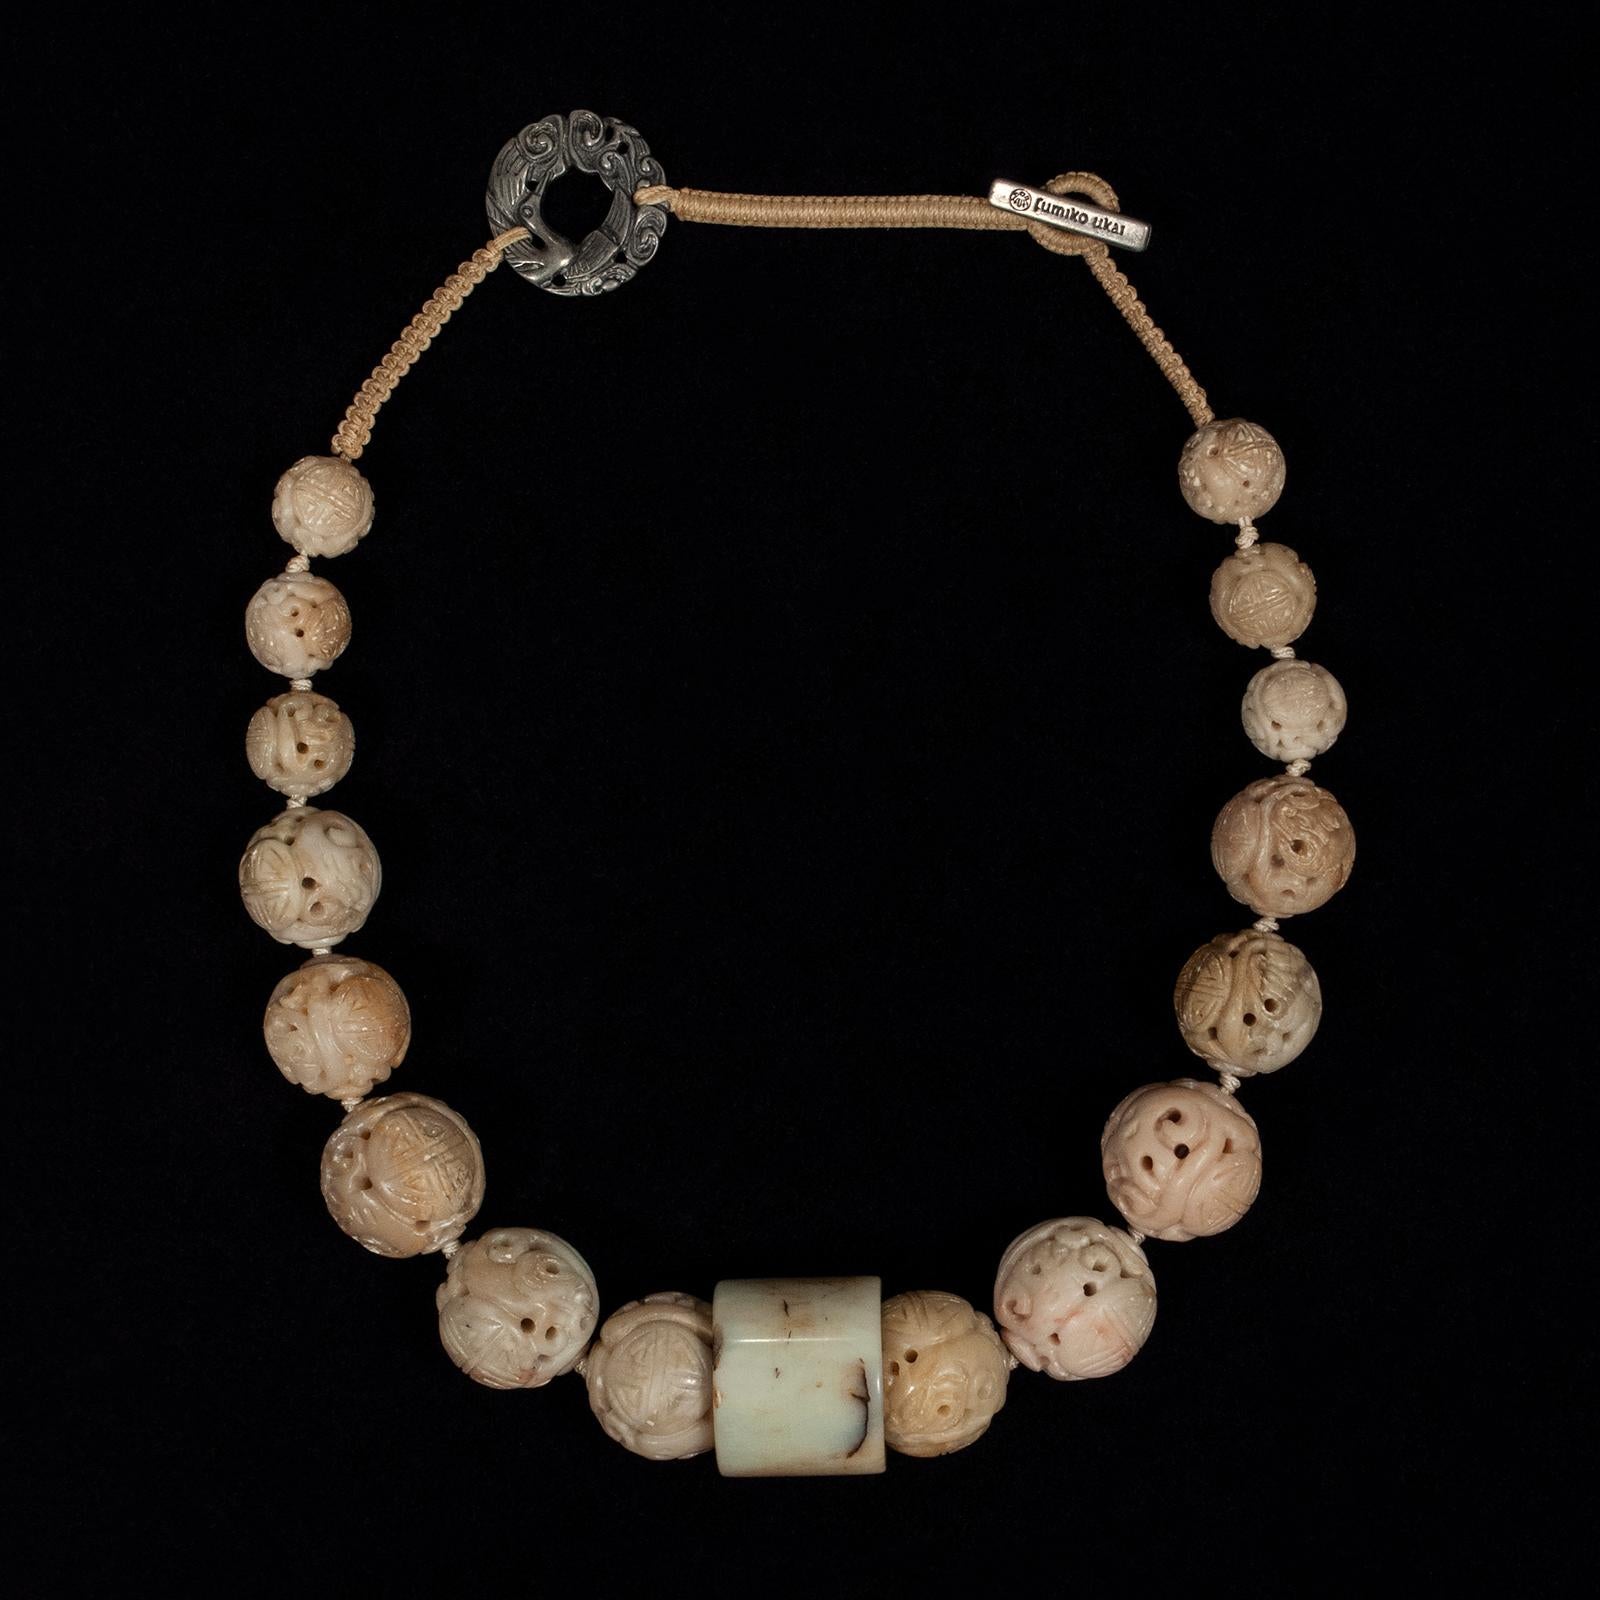 20th century Jade and Stone Necklace by Fumiko Ukai of Berkeley, CA

An elegant necklace created by the late Berkeley jewelry designer Fumiko Ukai, composed of nicely graduated carved stone beads with a polished jade archer's ring at the center. The